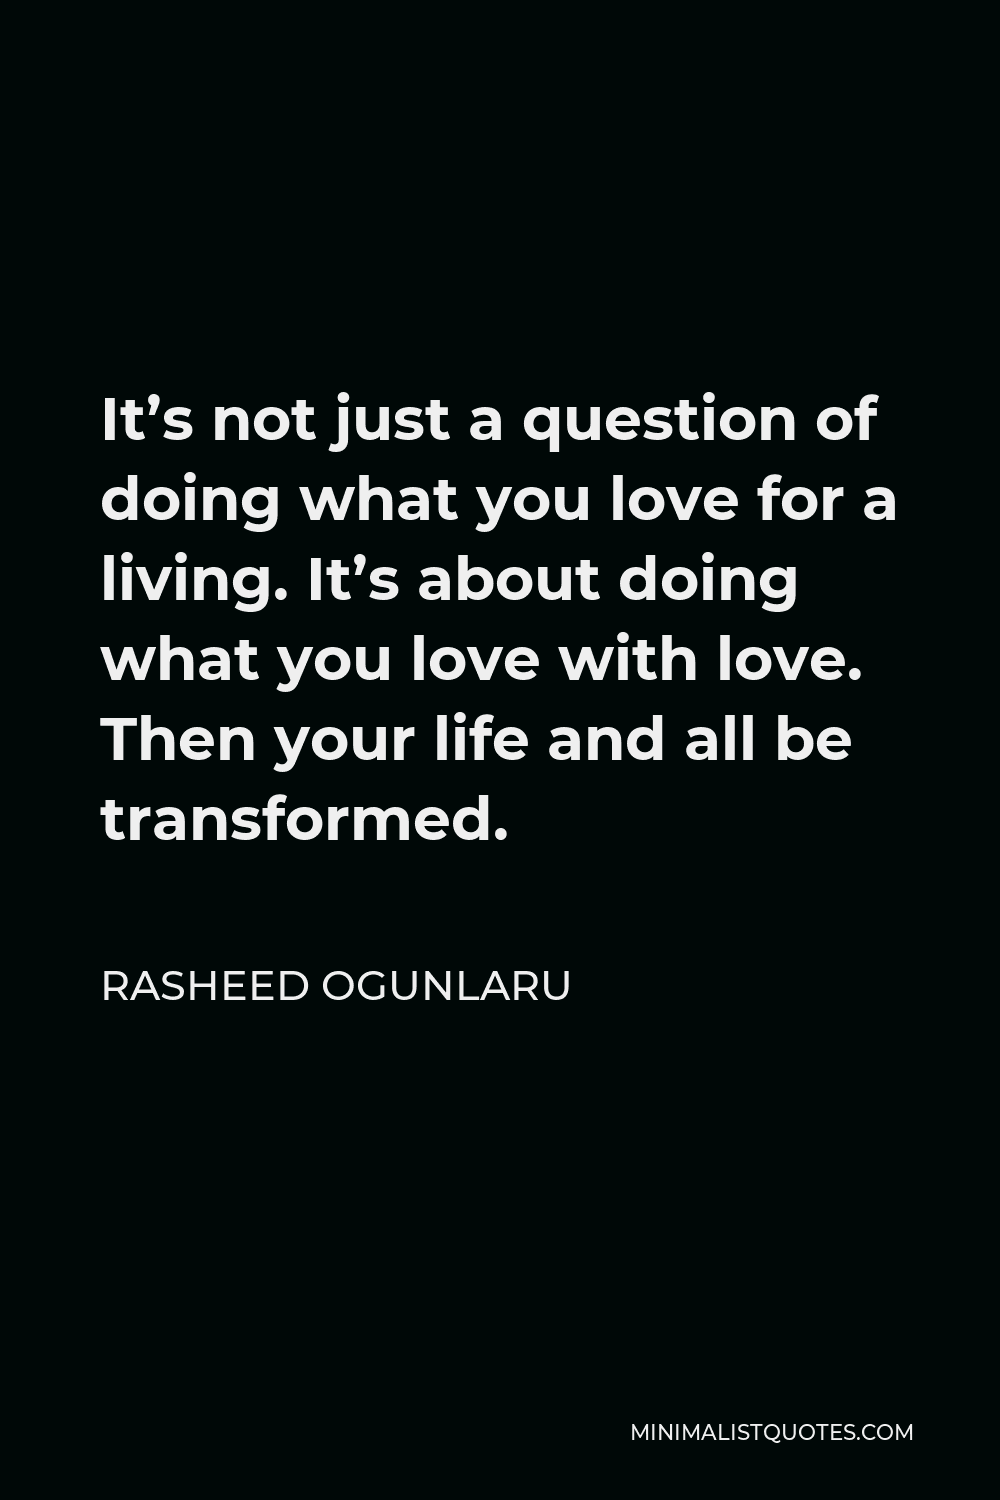 Rasheed Ogunlaru Quote - It’s not just a question of doing what you love for a living. It’s about doing what you love with love. Then your life and all be transformed.